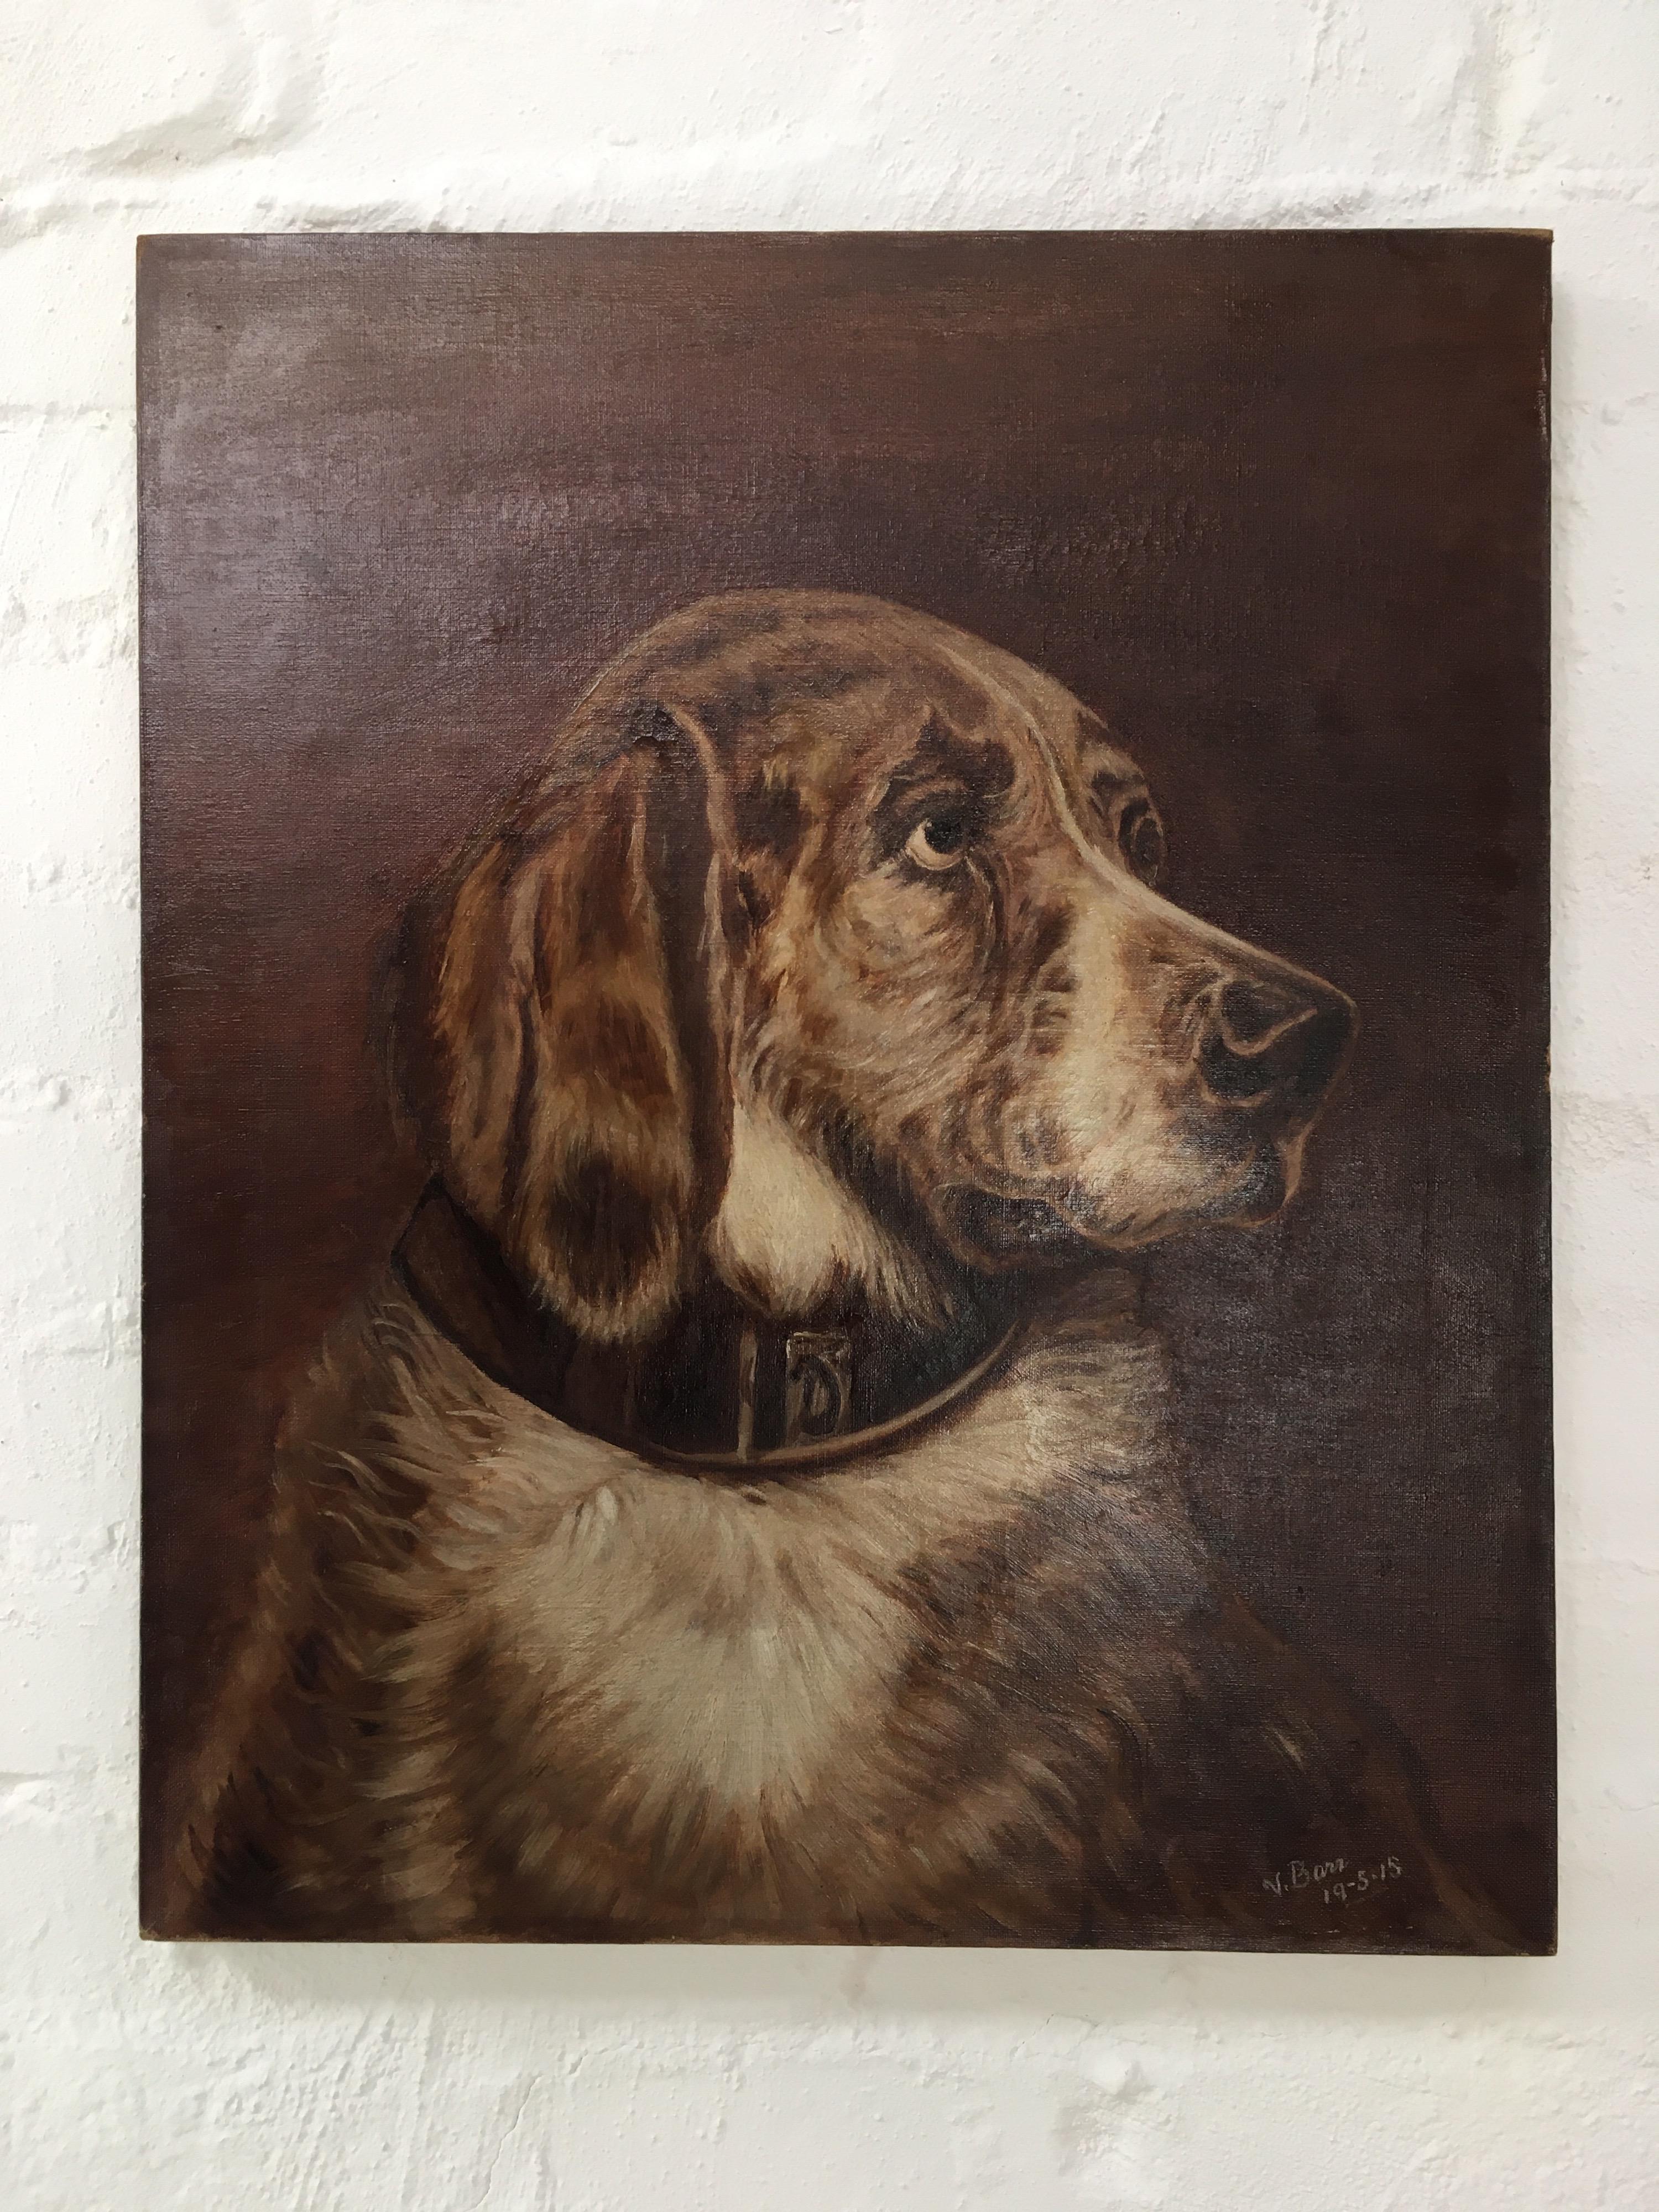 A wonderful large portrait of a bloodhound, painted in sepia tones in oils on canvas, signed and dated 19 May 1915. The painting was produced in Australia. This date and location is significant to the symbolism of the painting.

After Sir Edwin